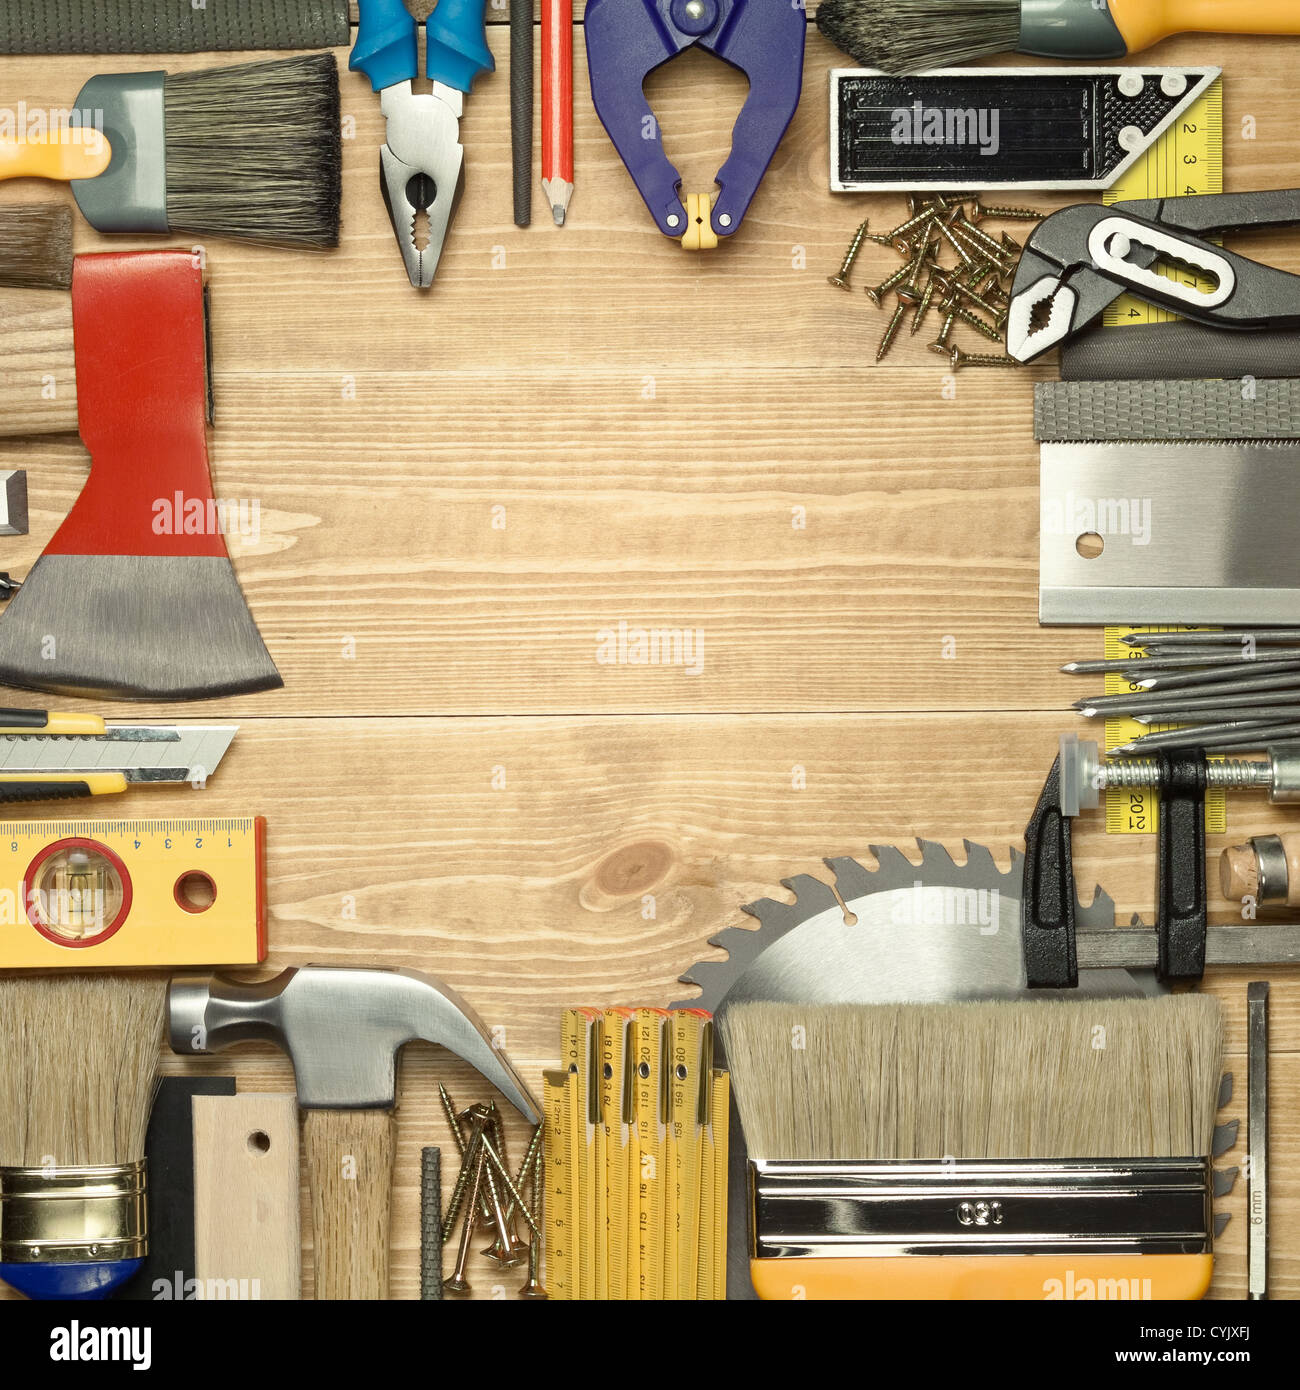 Carpentry tools on a wooden board. Stock Photo